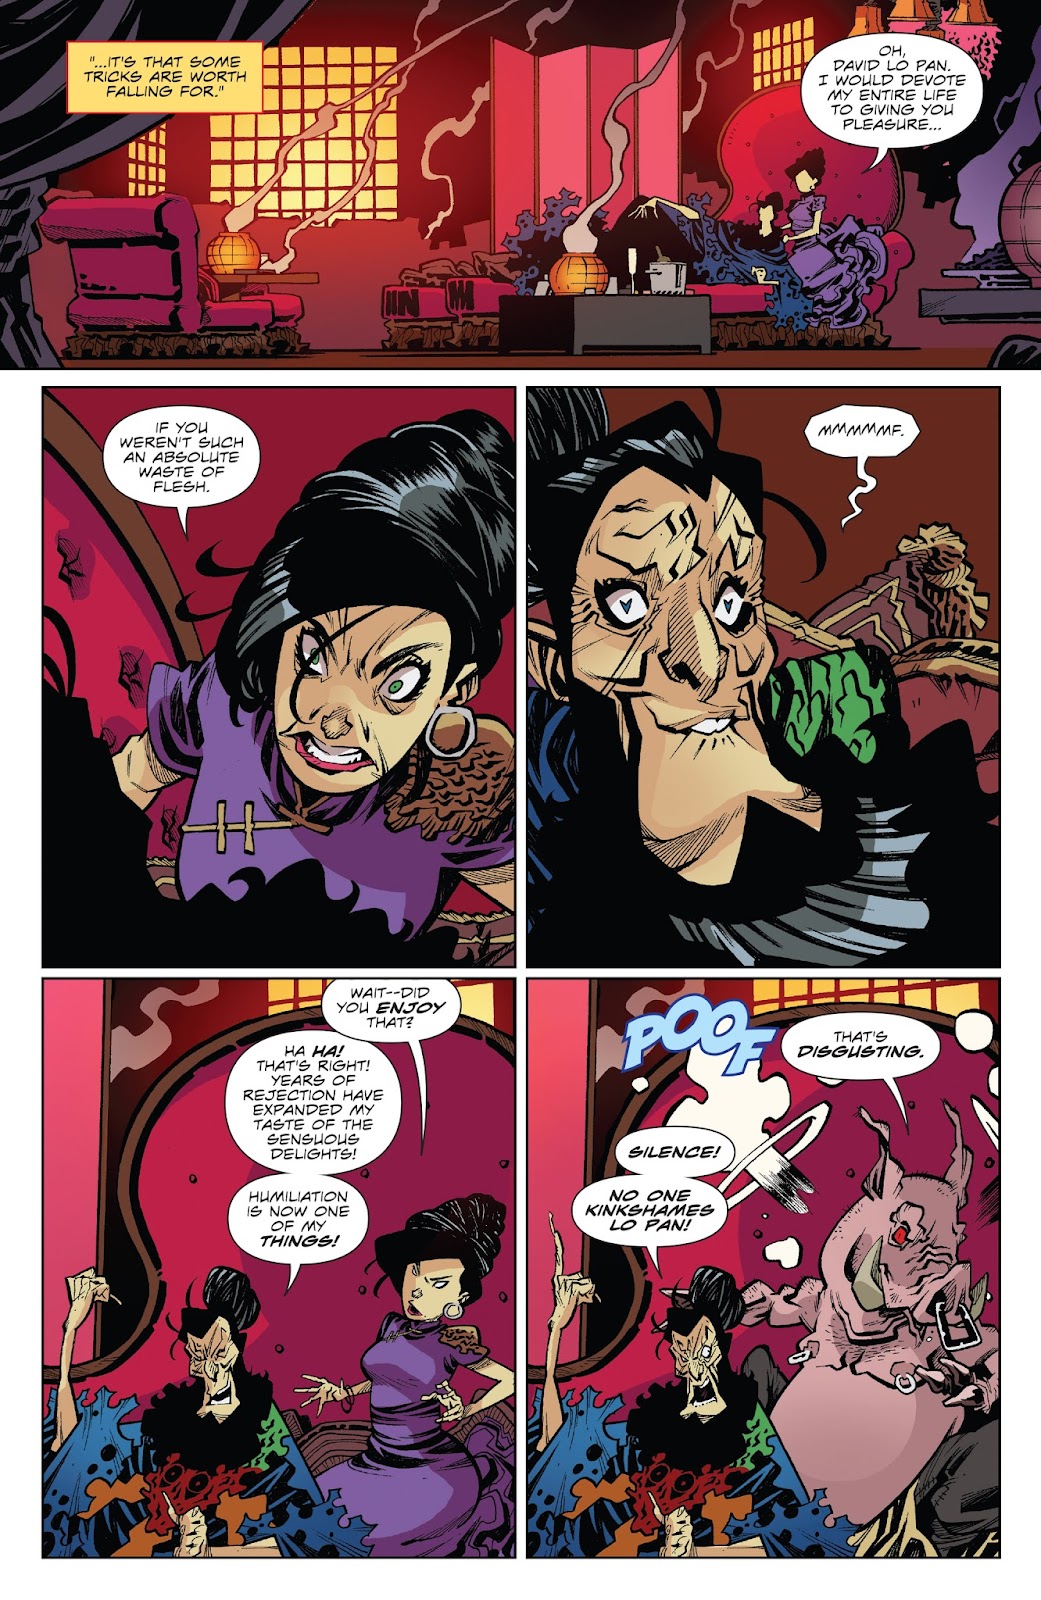 Big Trouble in Little China: Old Man Jack issue 6 - Page 5